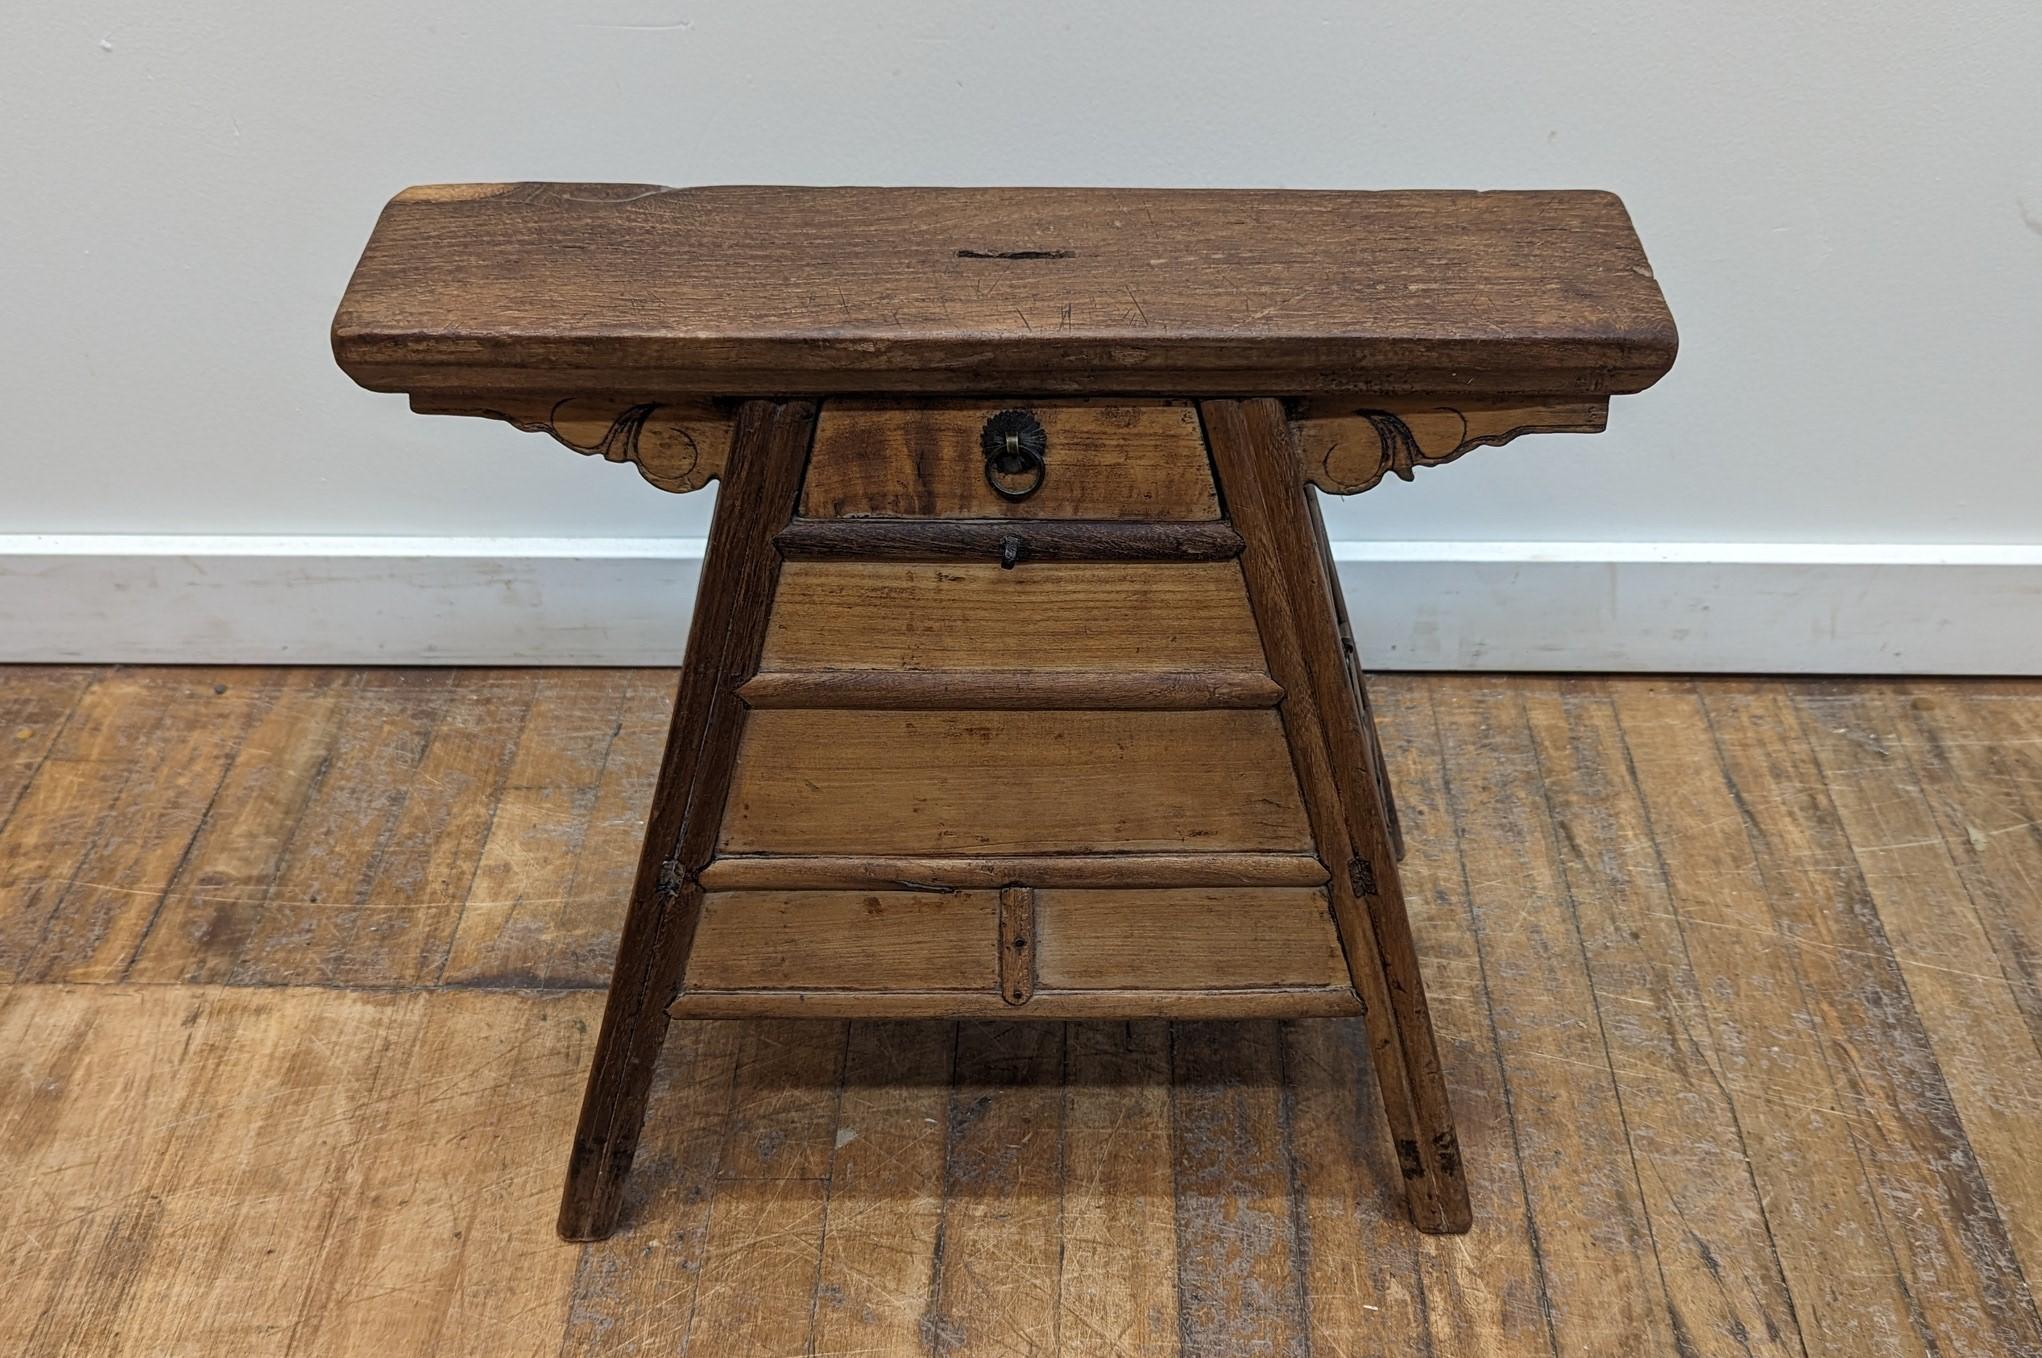 19th century Chinese Stool. This is an antique Barber stool.  Natural wood stool of Elm wood & Poplar.  The stool has one small drawer in the front, and two larger drawers on the side. The seat has a hole in the middle of the top which is where